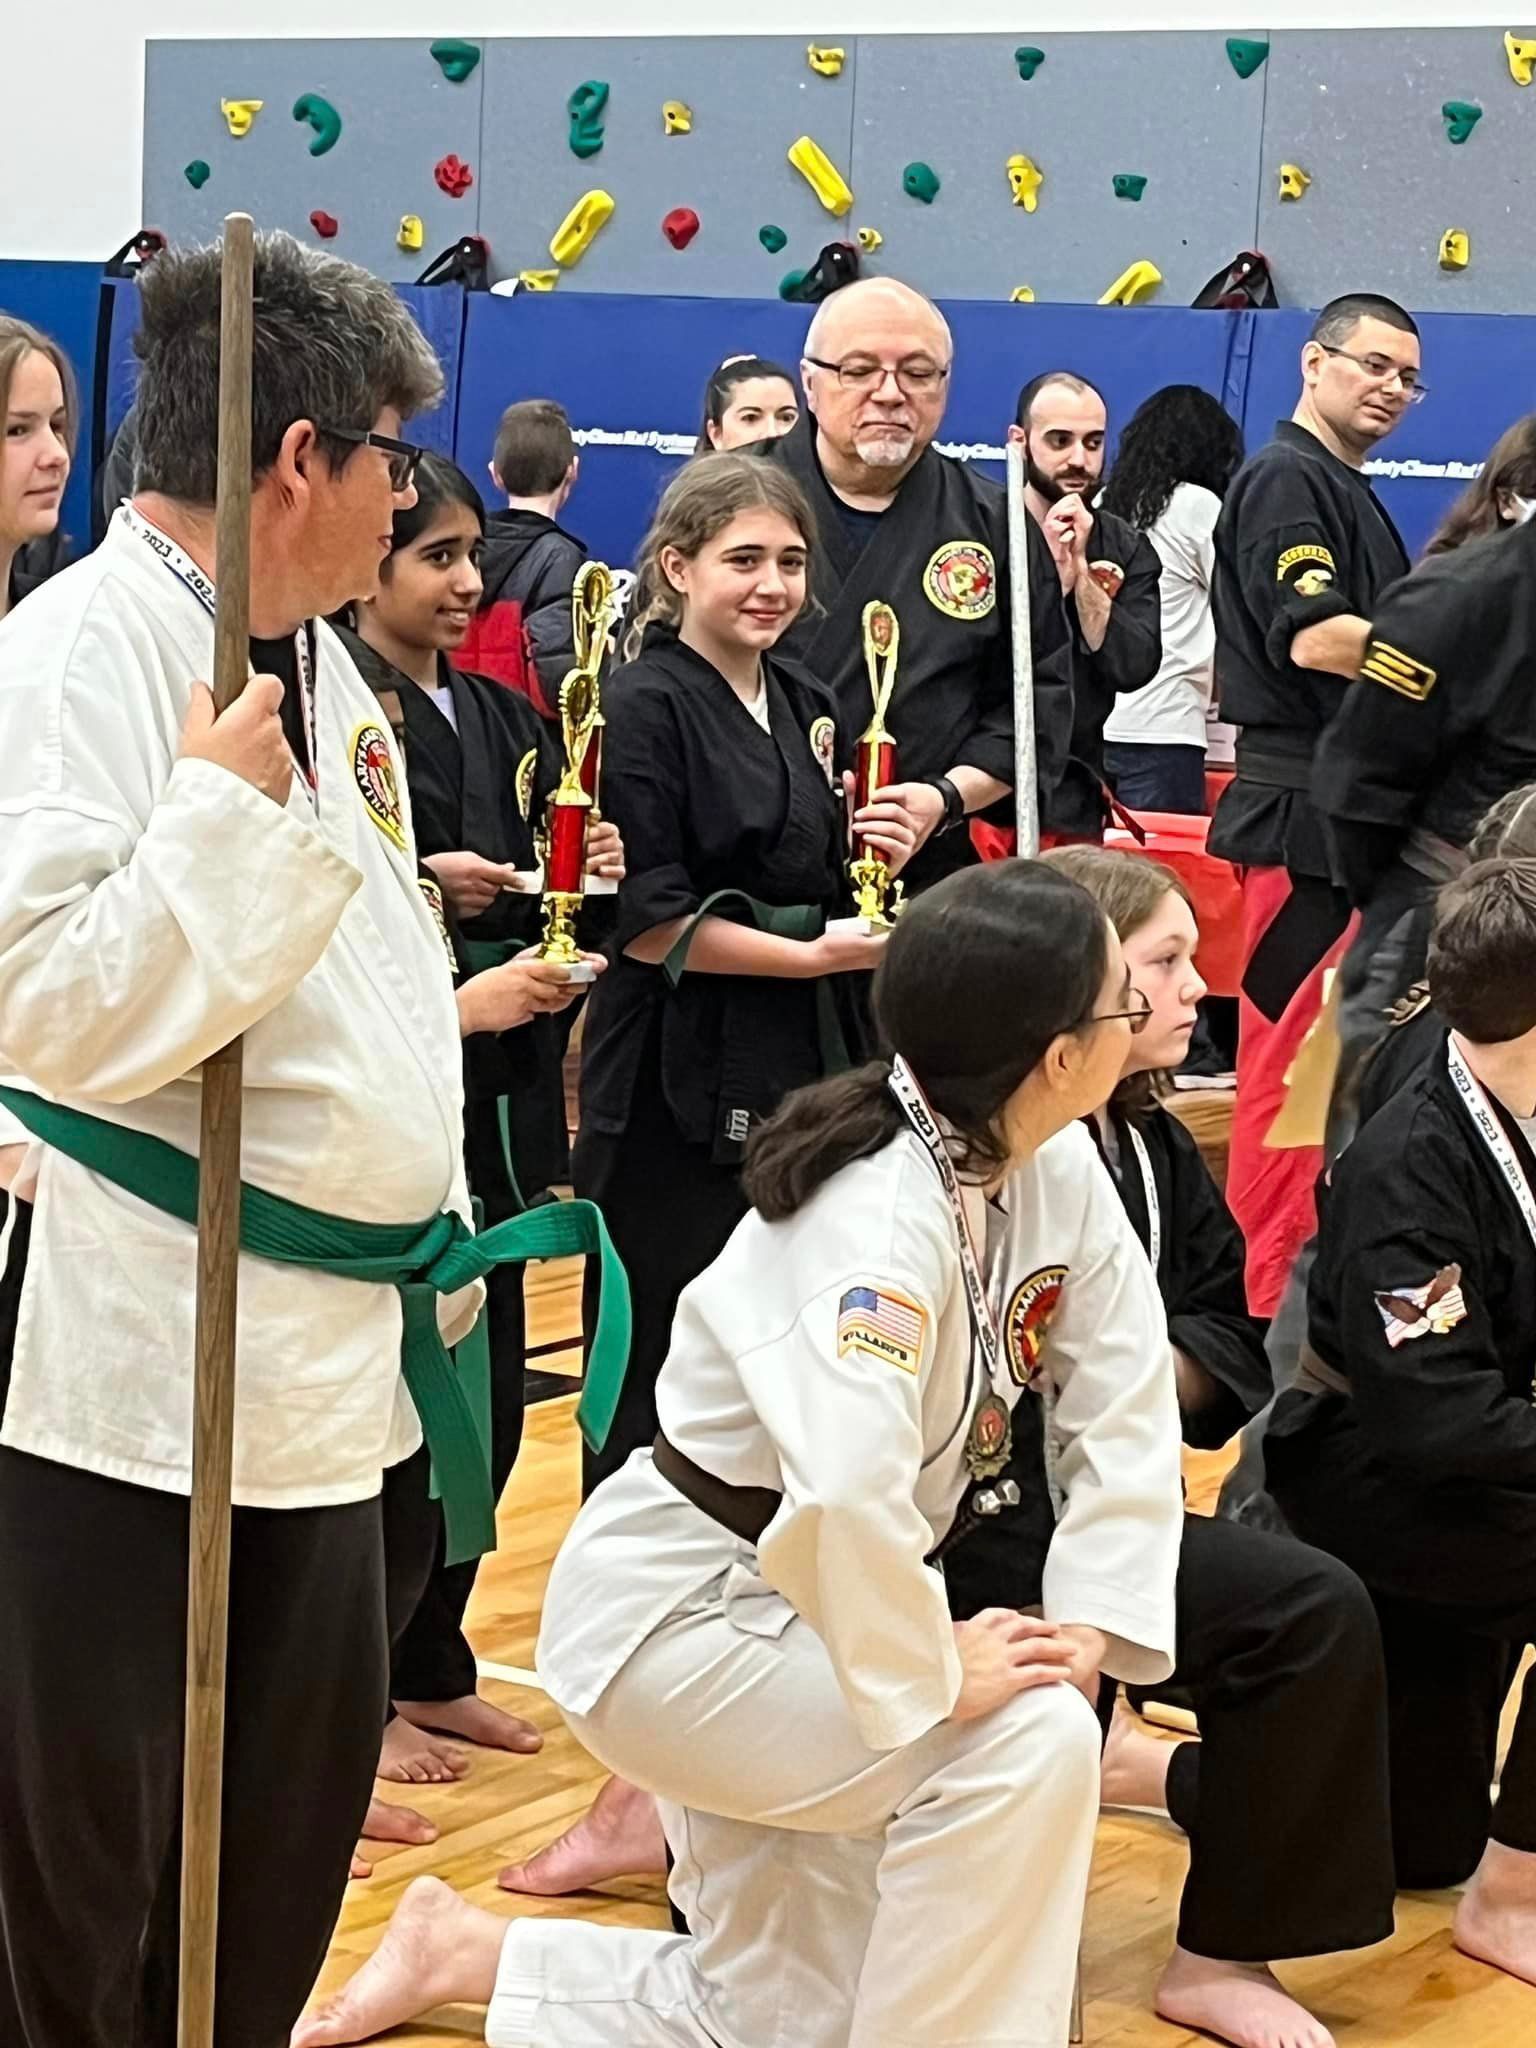 a group of people in martial arts uniforms holding trophies